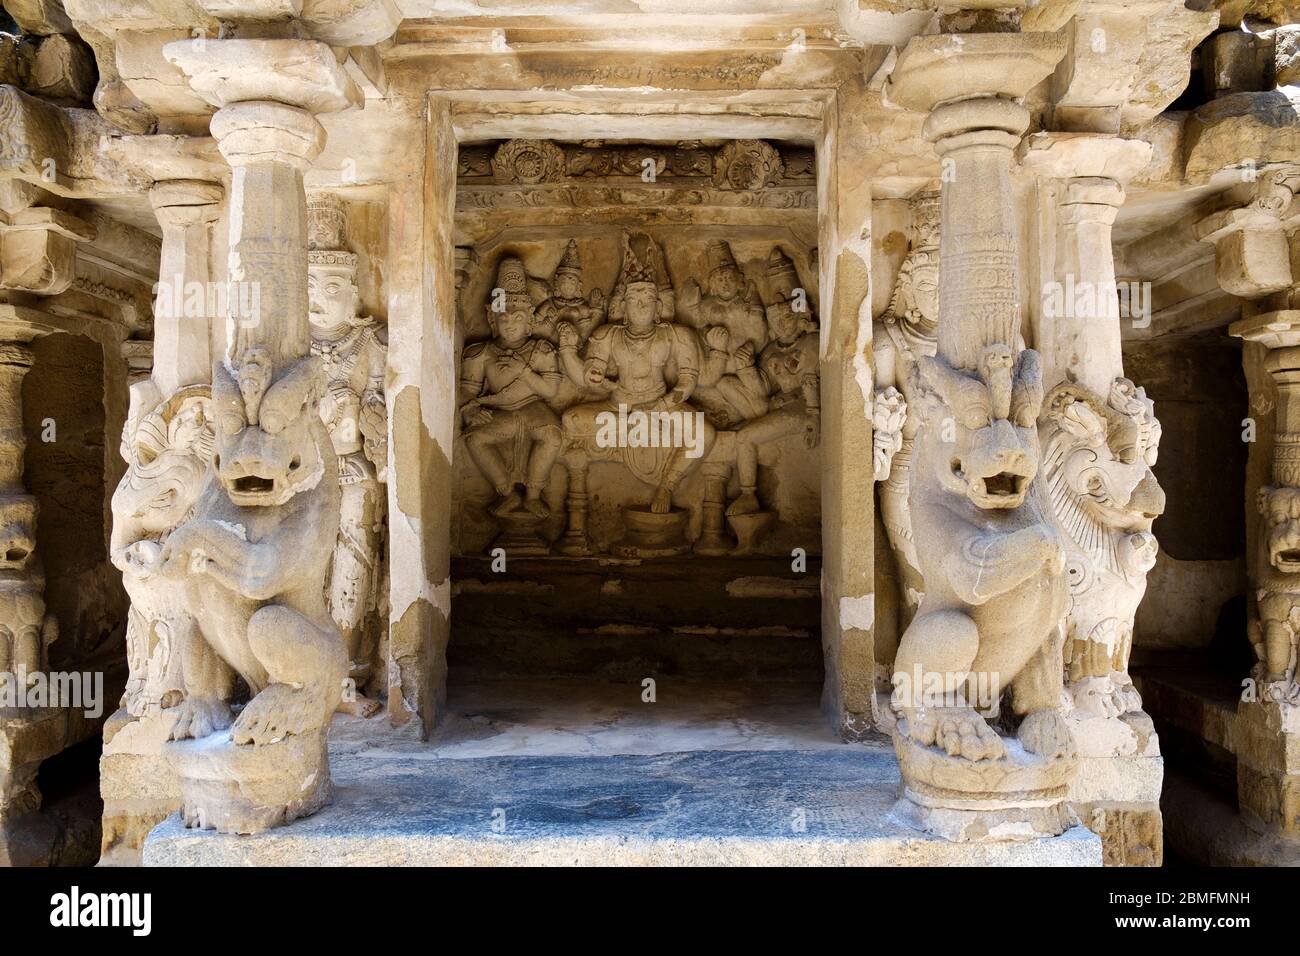 A niche with stone-carved deities and mythological lion-shaped columns at Kailasanathar Temple, Kanchipuram, Tamil Nadu, India. Stock Photo